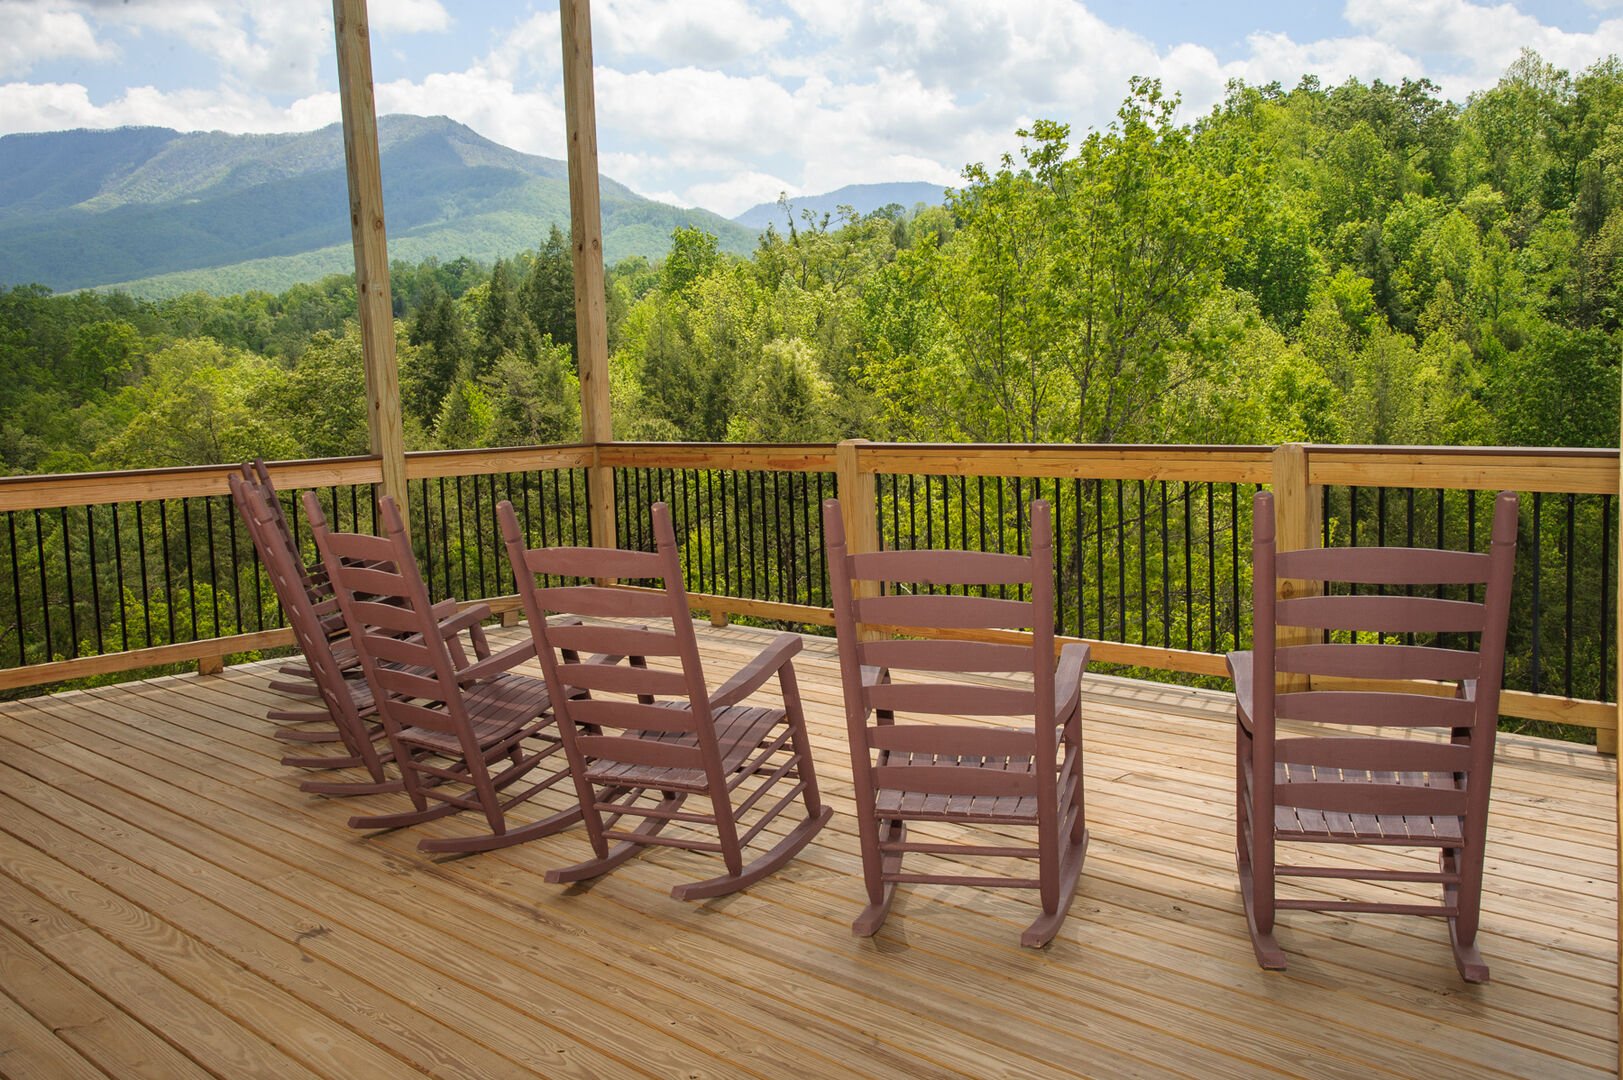 Many Rocking Chairs in the Deck with Mountain View.